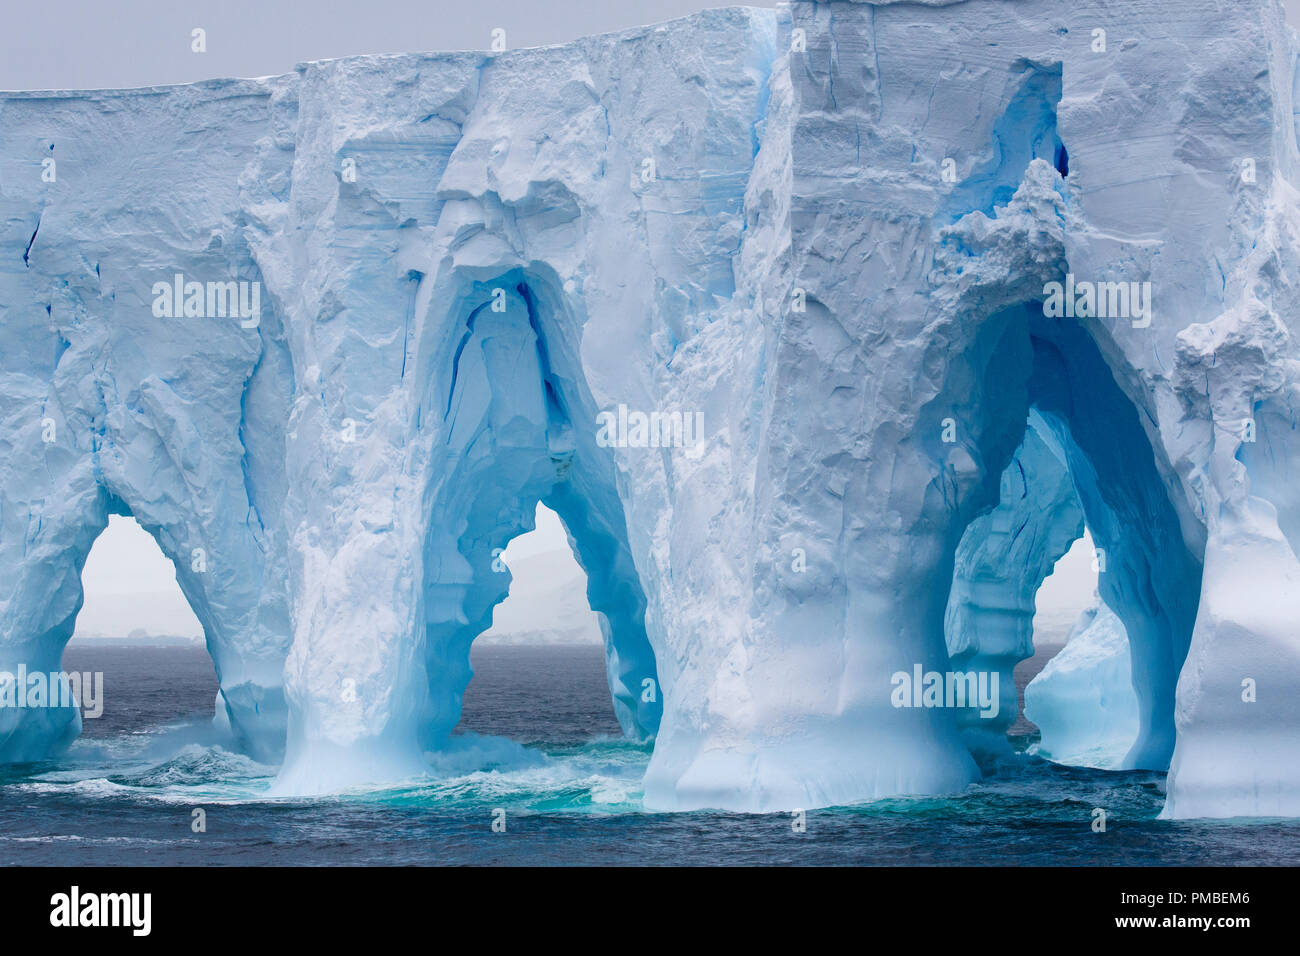 Huge arched iceberg south of the Antarctica Circle, Antarctica. Stock Photo